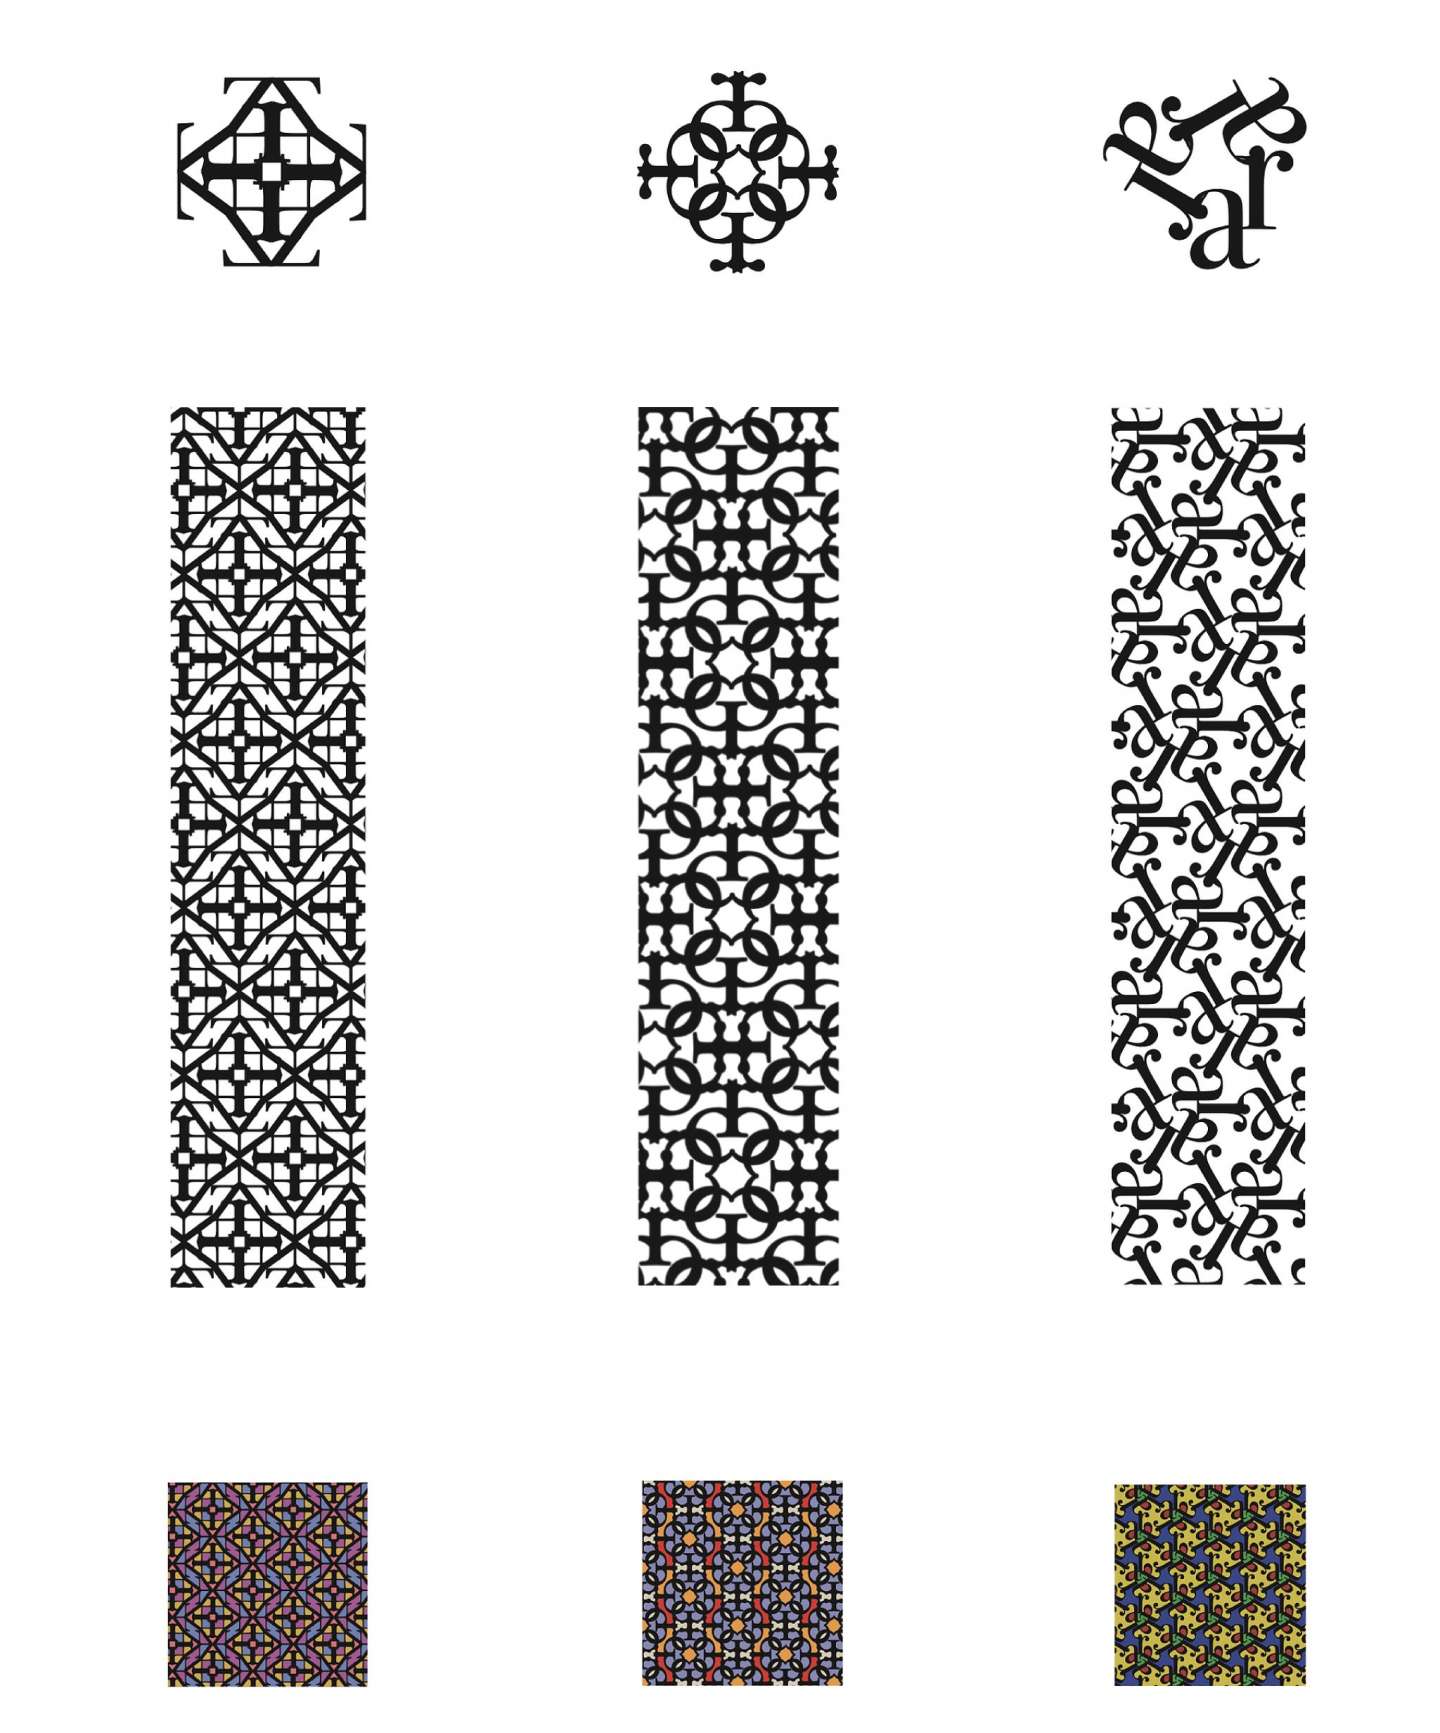 Font and Pattern